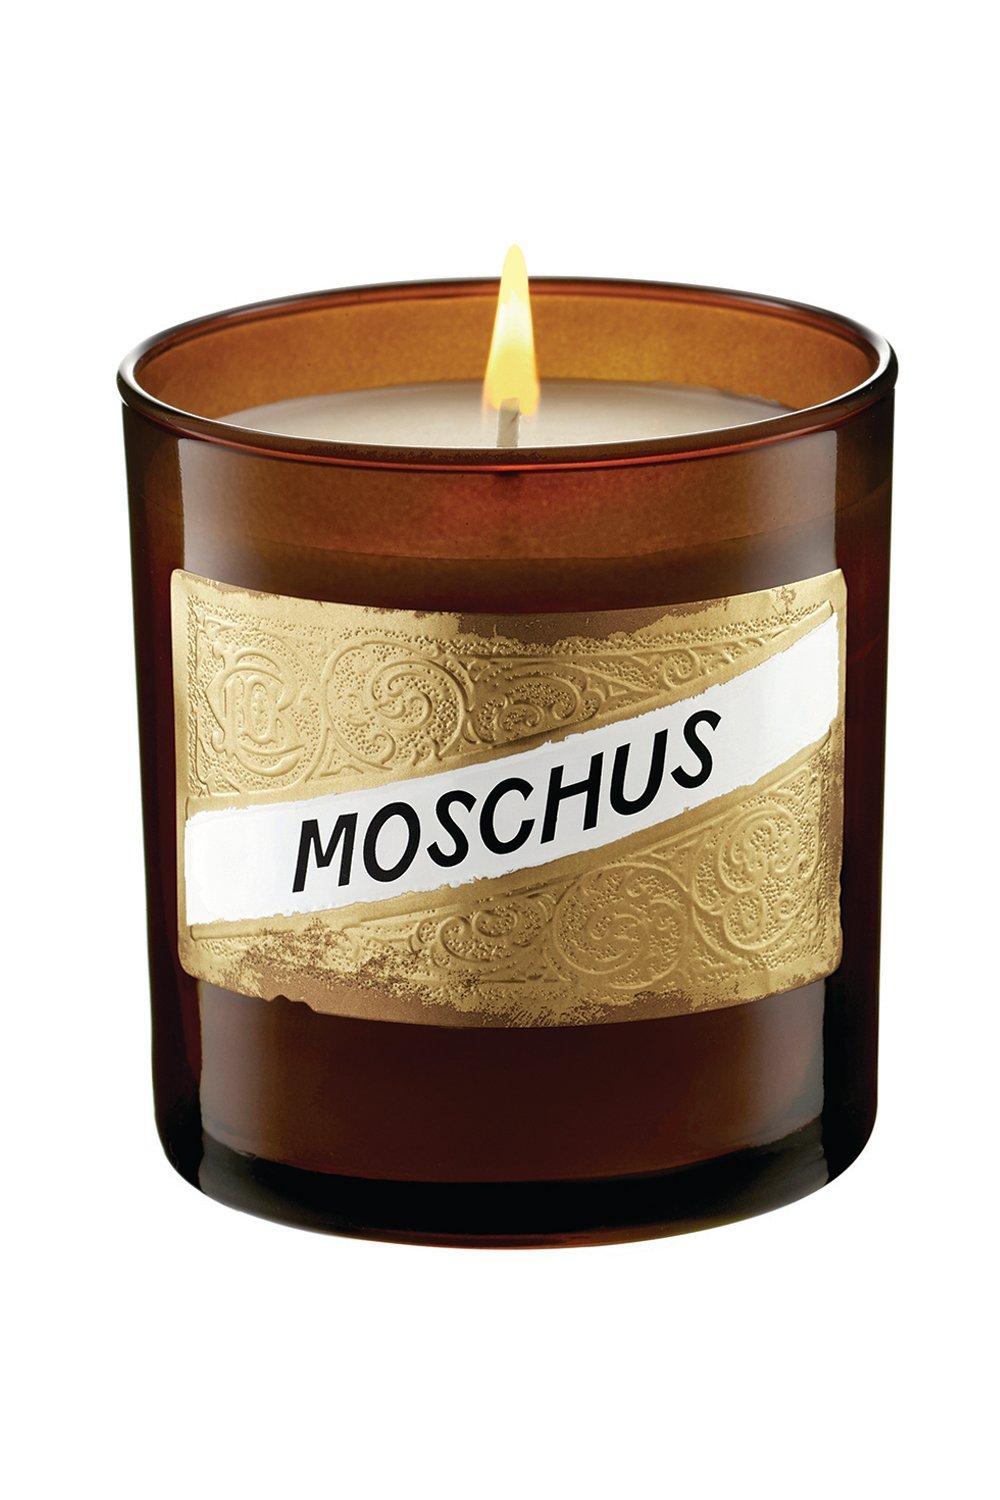 Moschus (Musk) Candle